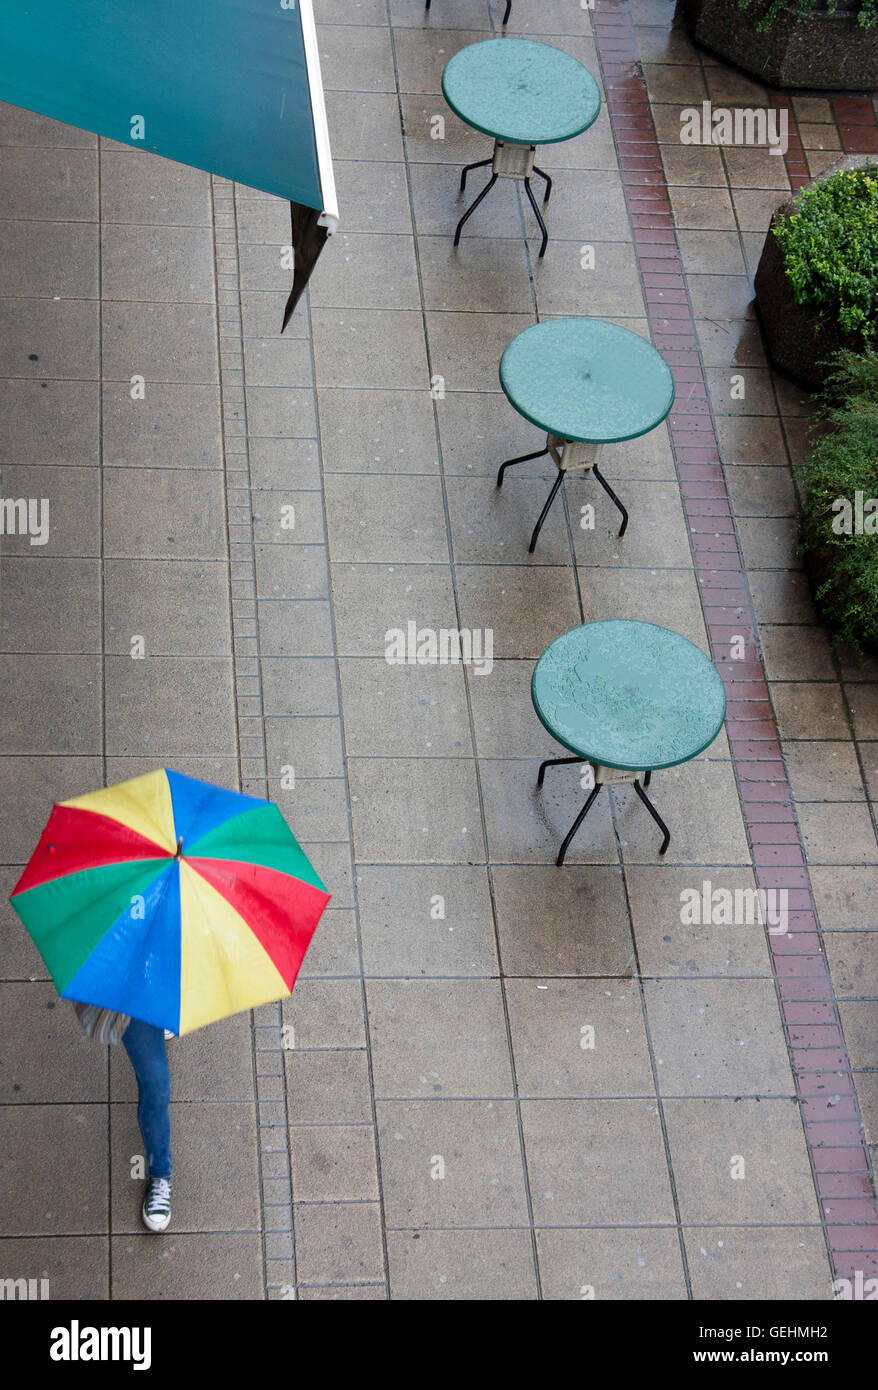 Empty caffe tables on a rainy day. Someone holding an umbrella walking by. Stock Photo